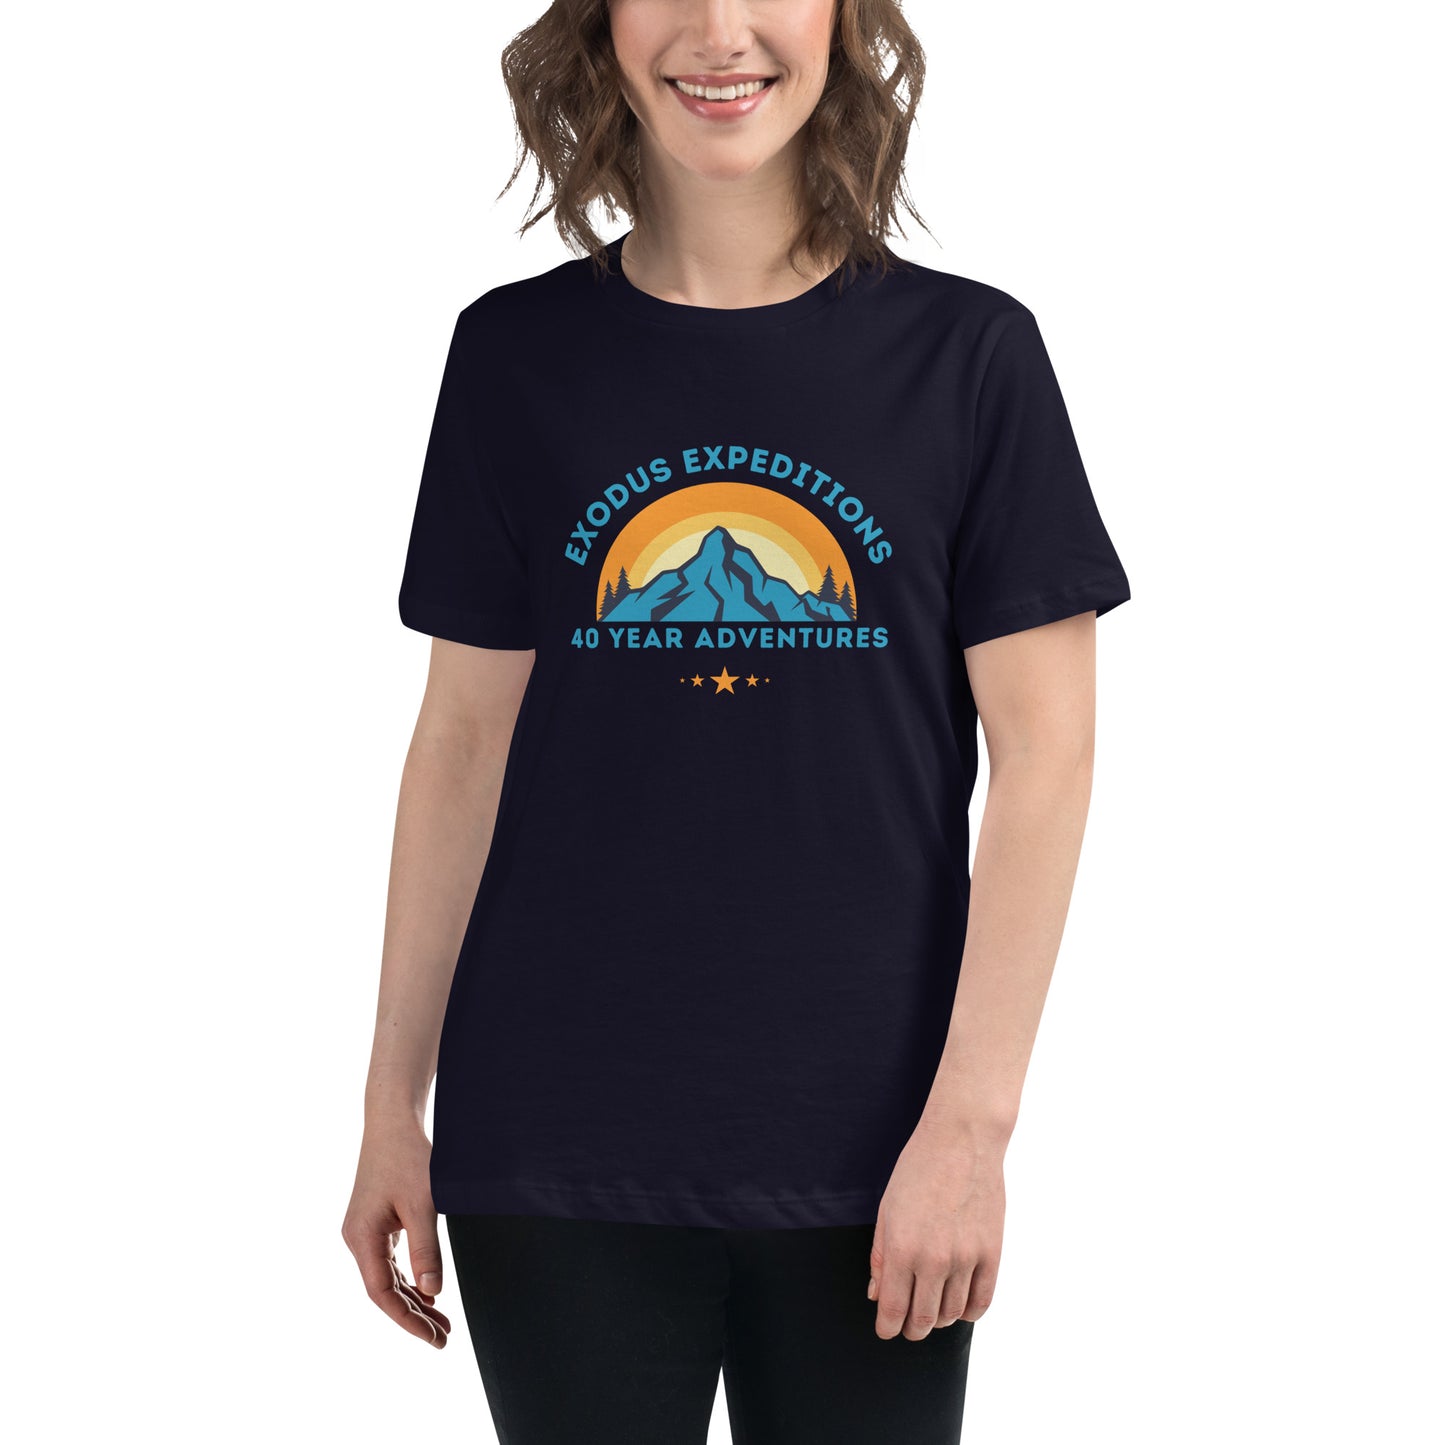 EXODUS EXPEDITIONS 40 YEAR ADVENTURES Women's Relaxed T-Shirt